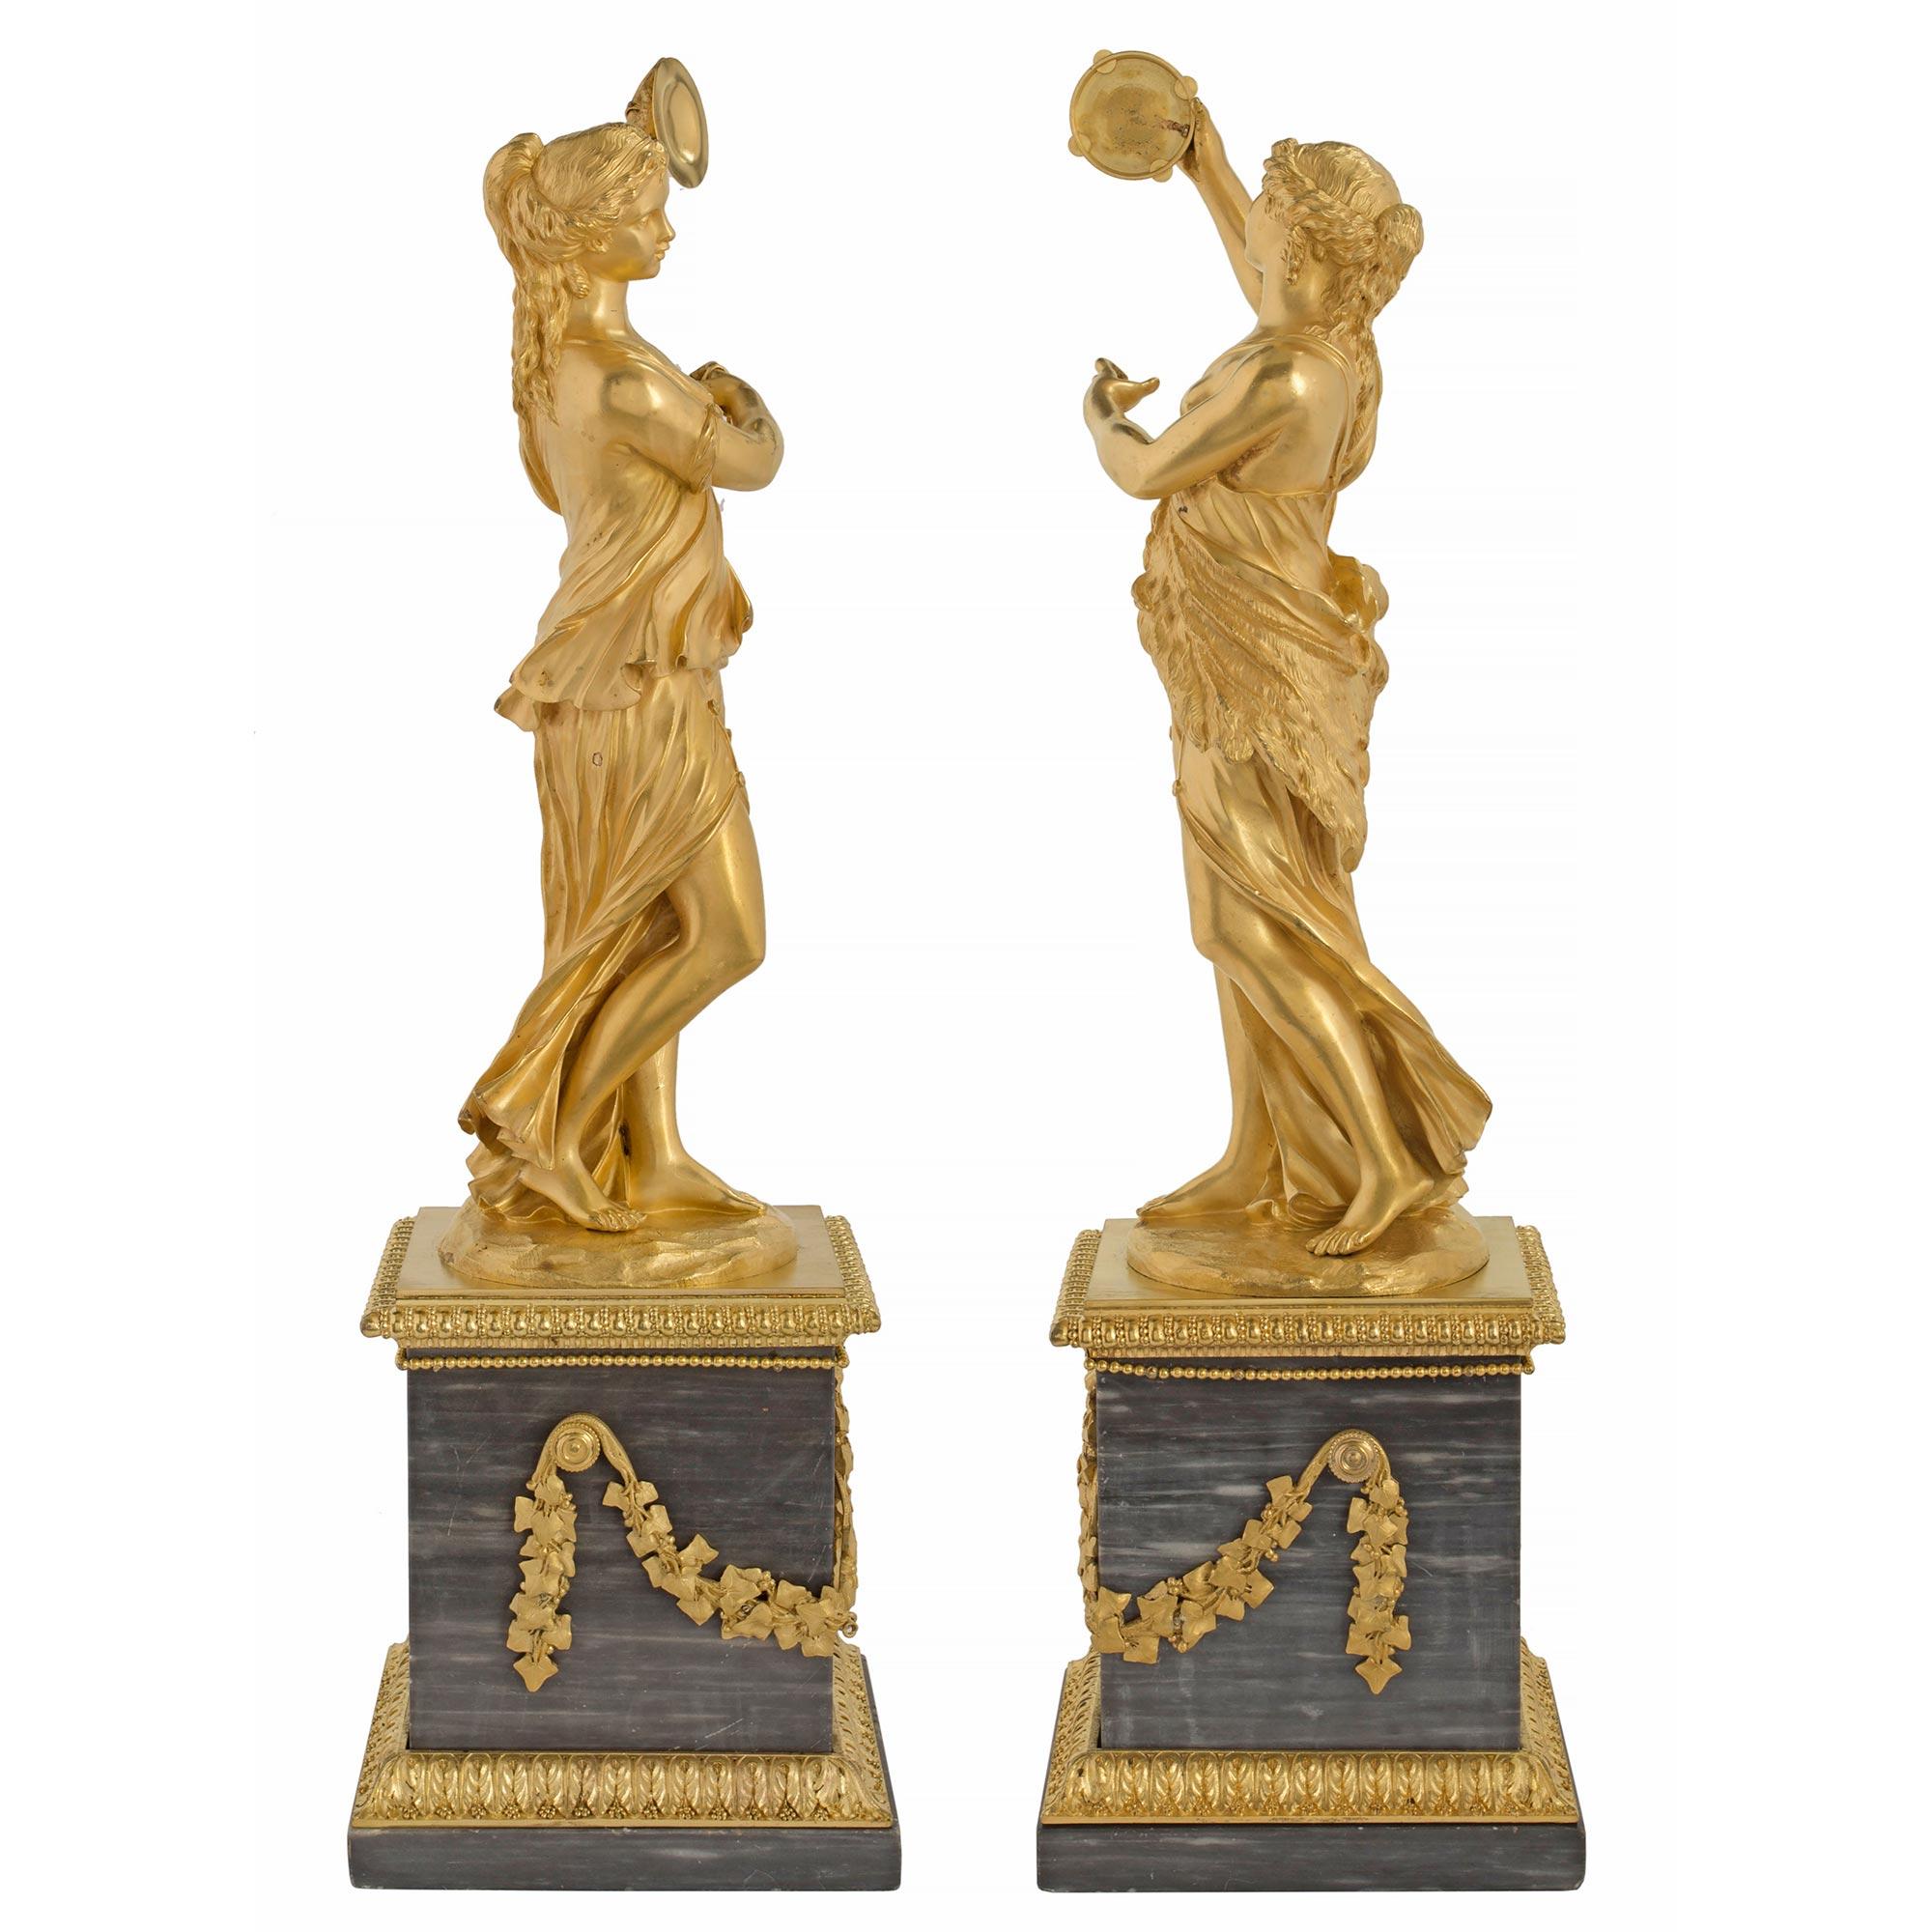 A most elegant and extremely high quality pair of French mid 19th century Louis XVI st. ormolu, Wedgwood and marble decorative statues. Raised by rectangular shaped Bleu Turquin marble plinths with handsome acanthus leaf designed ormolu bands below